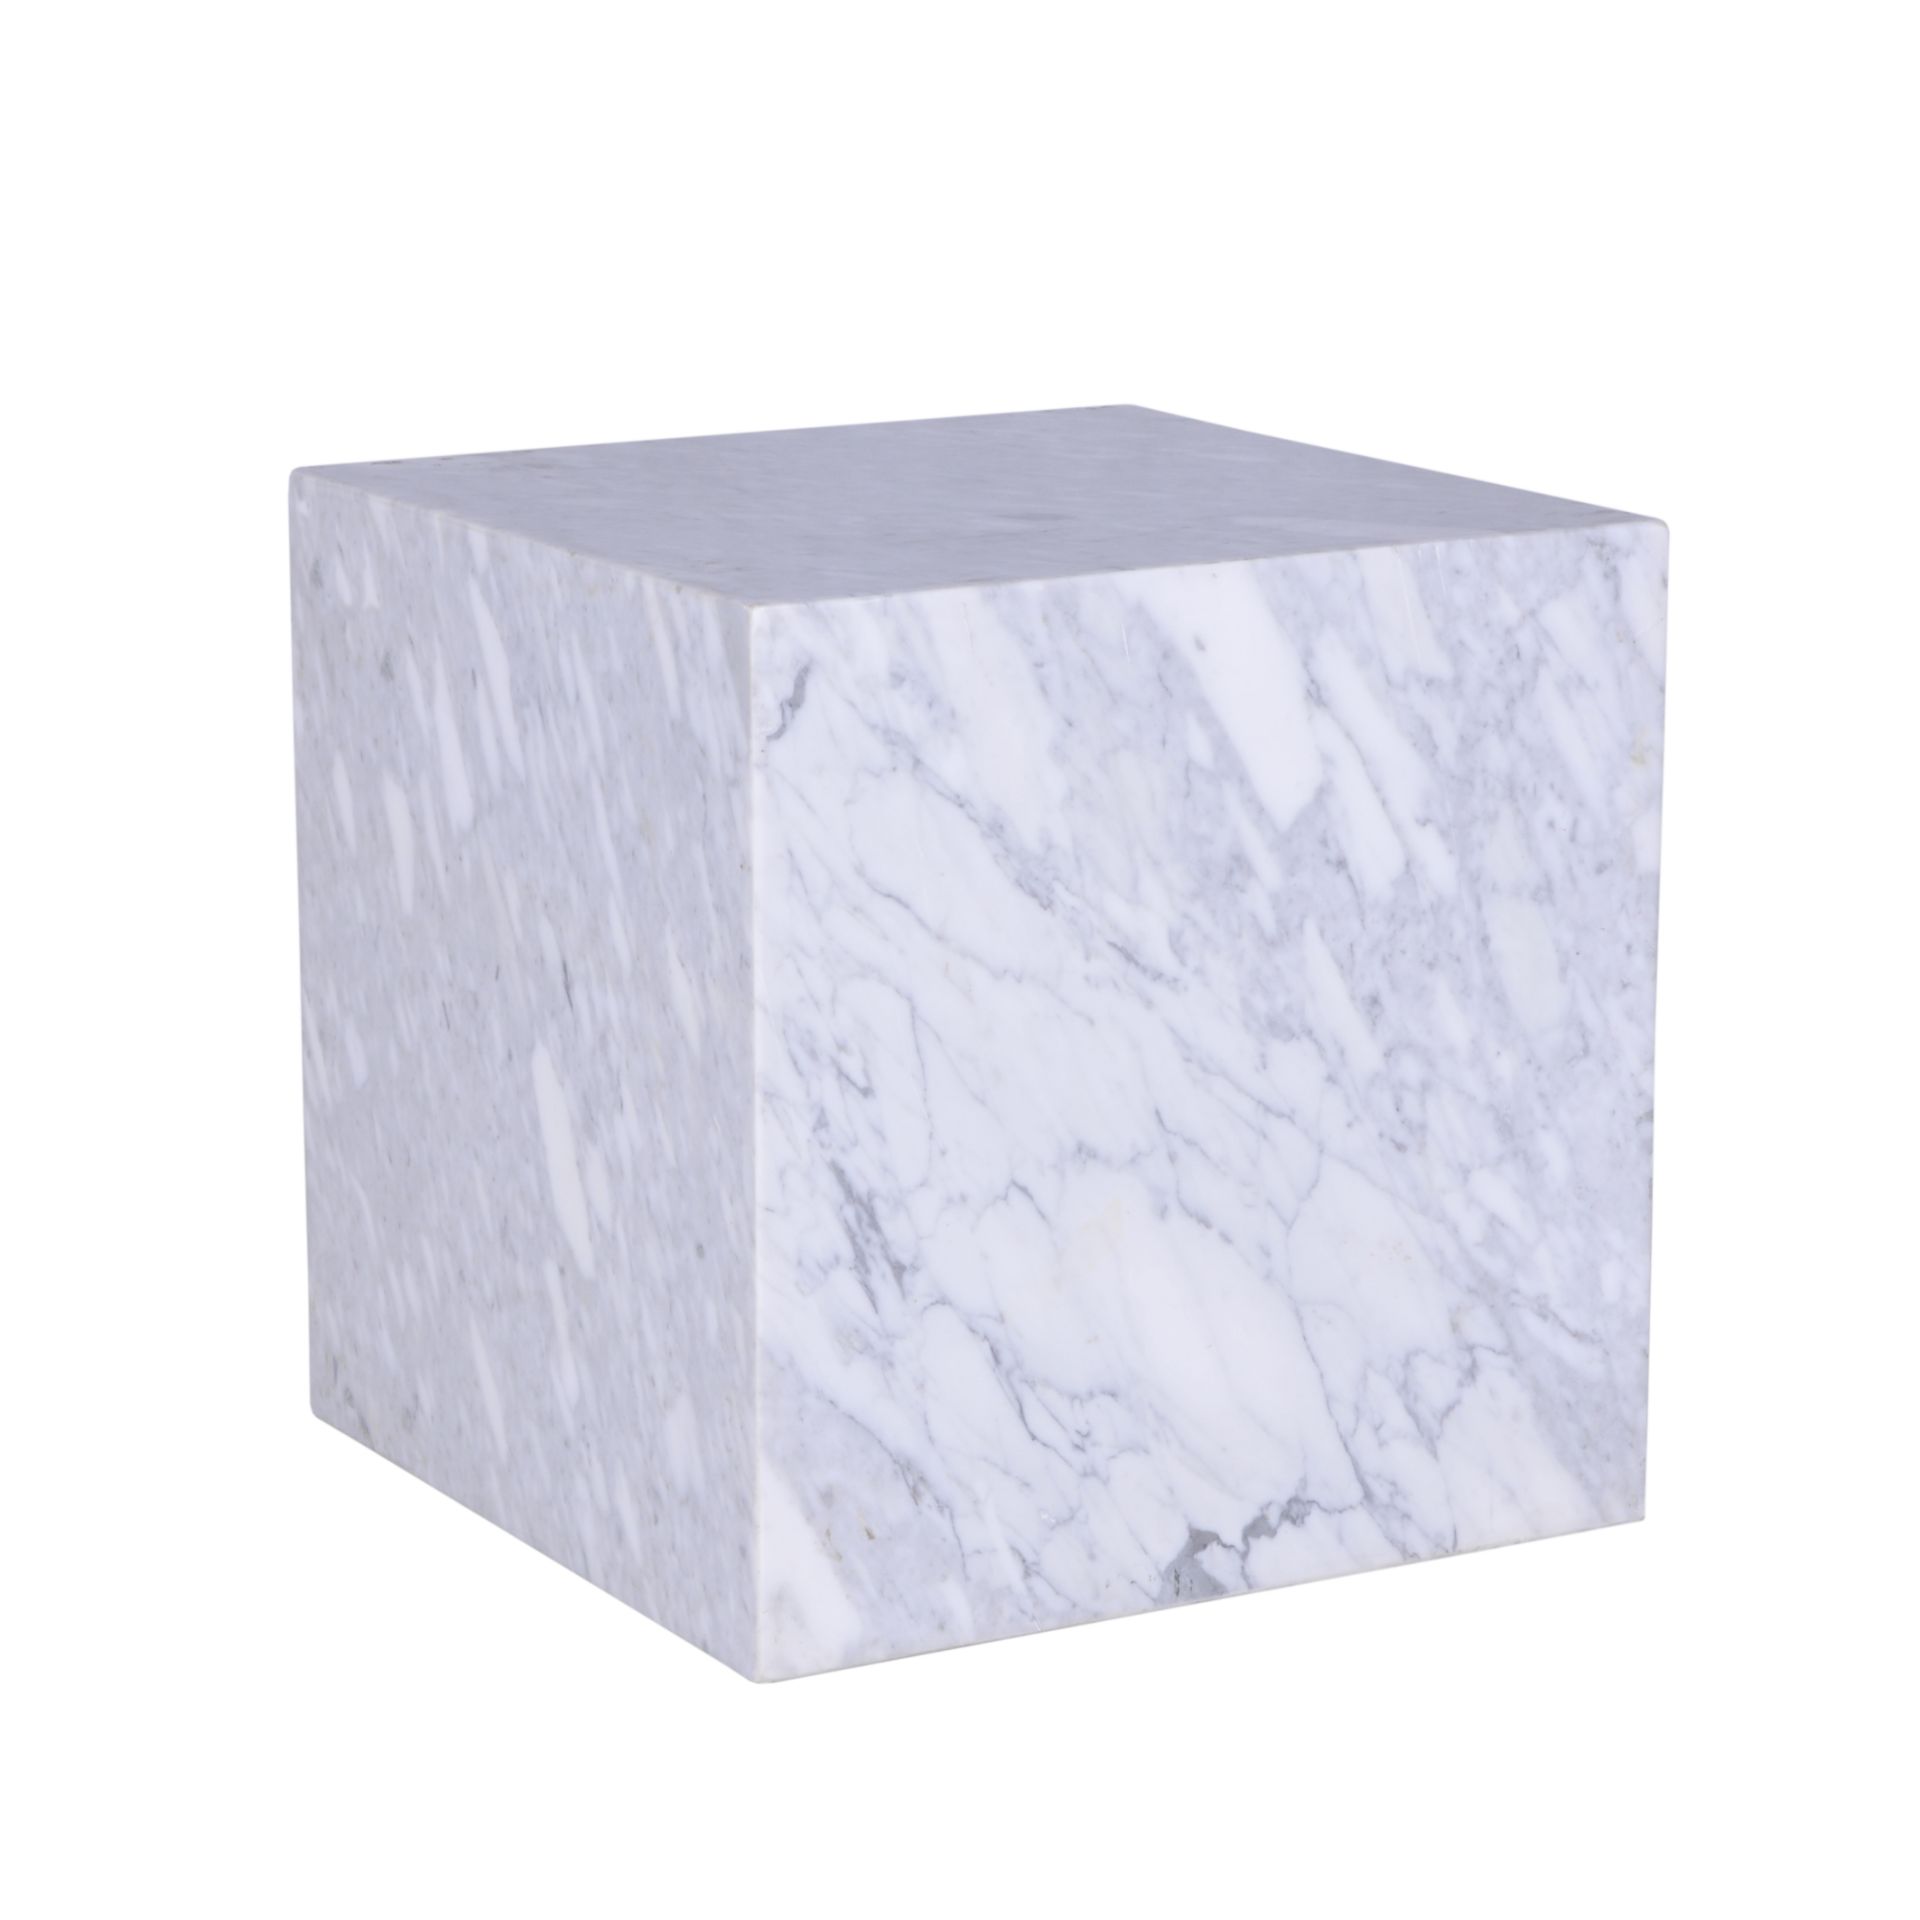 Marble Cube 50cm Marble White Polished 50x50x50cm RRP £ 987